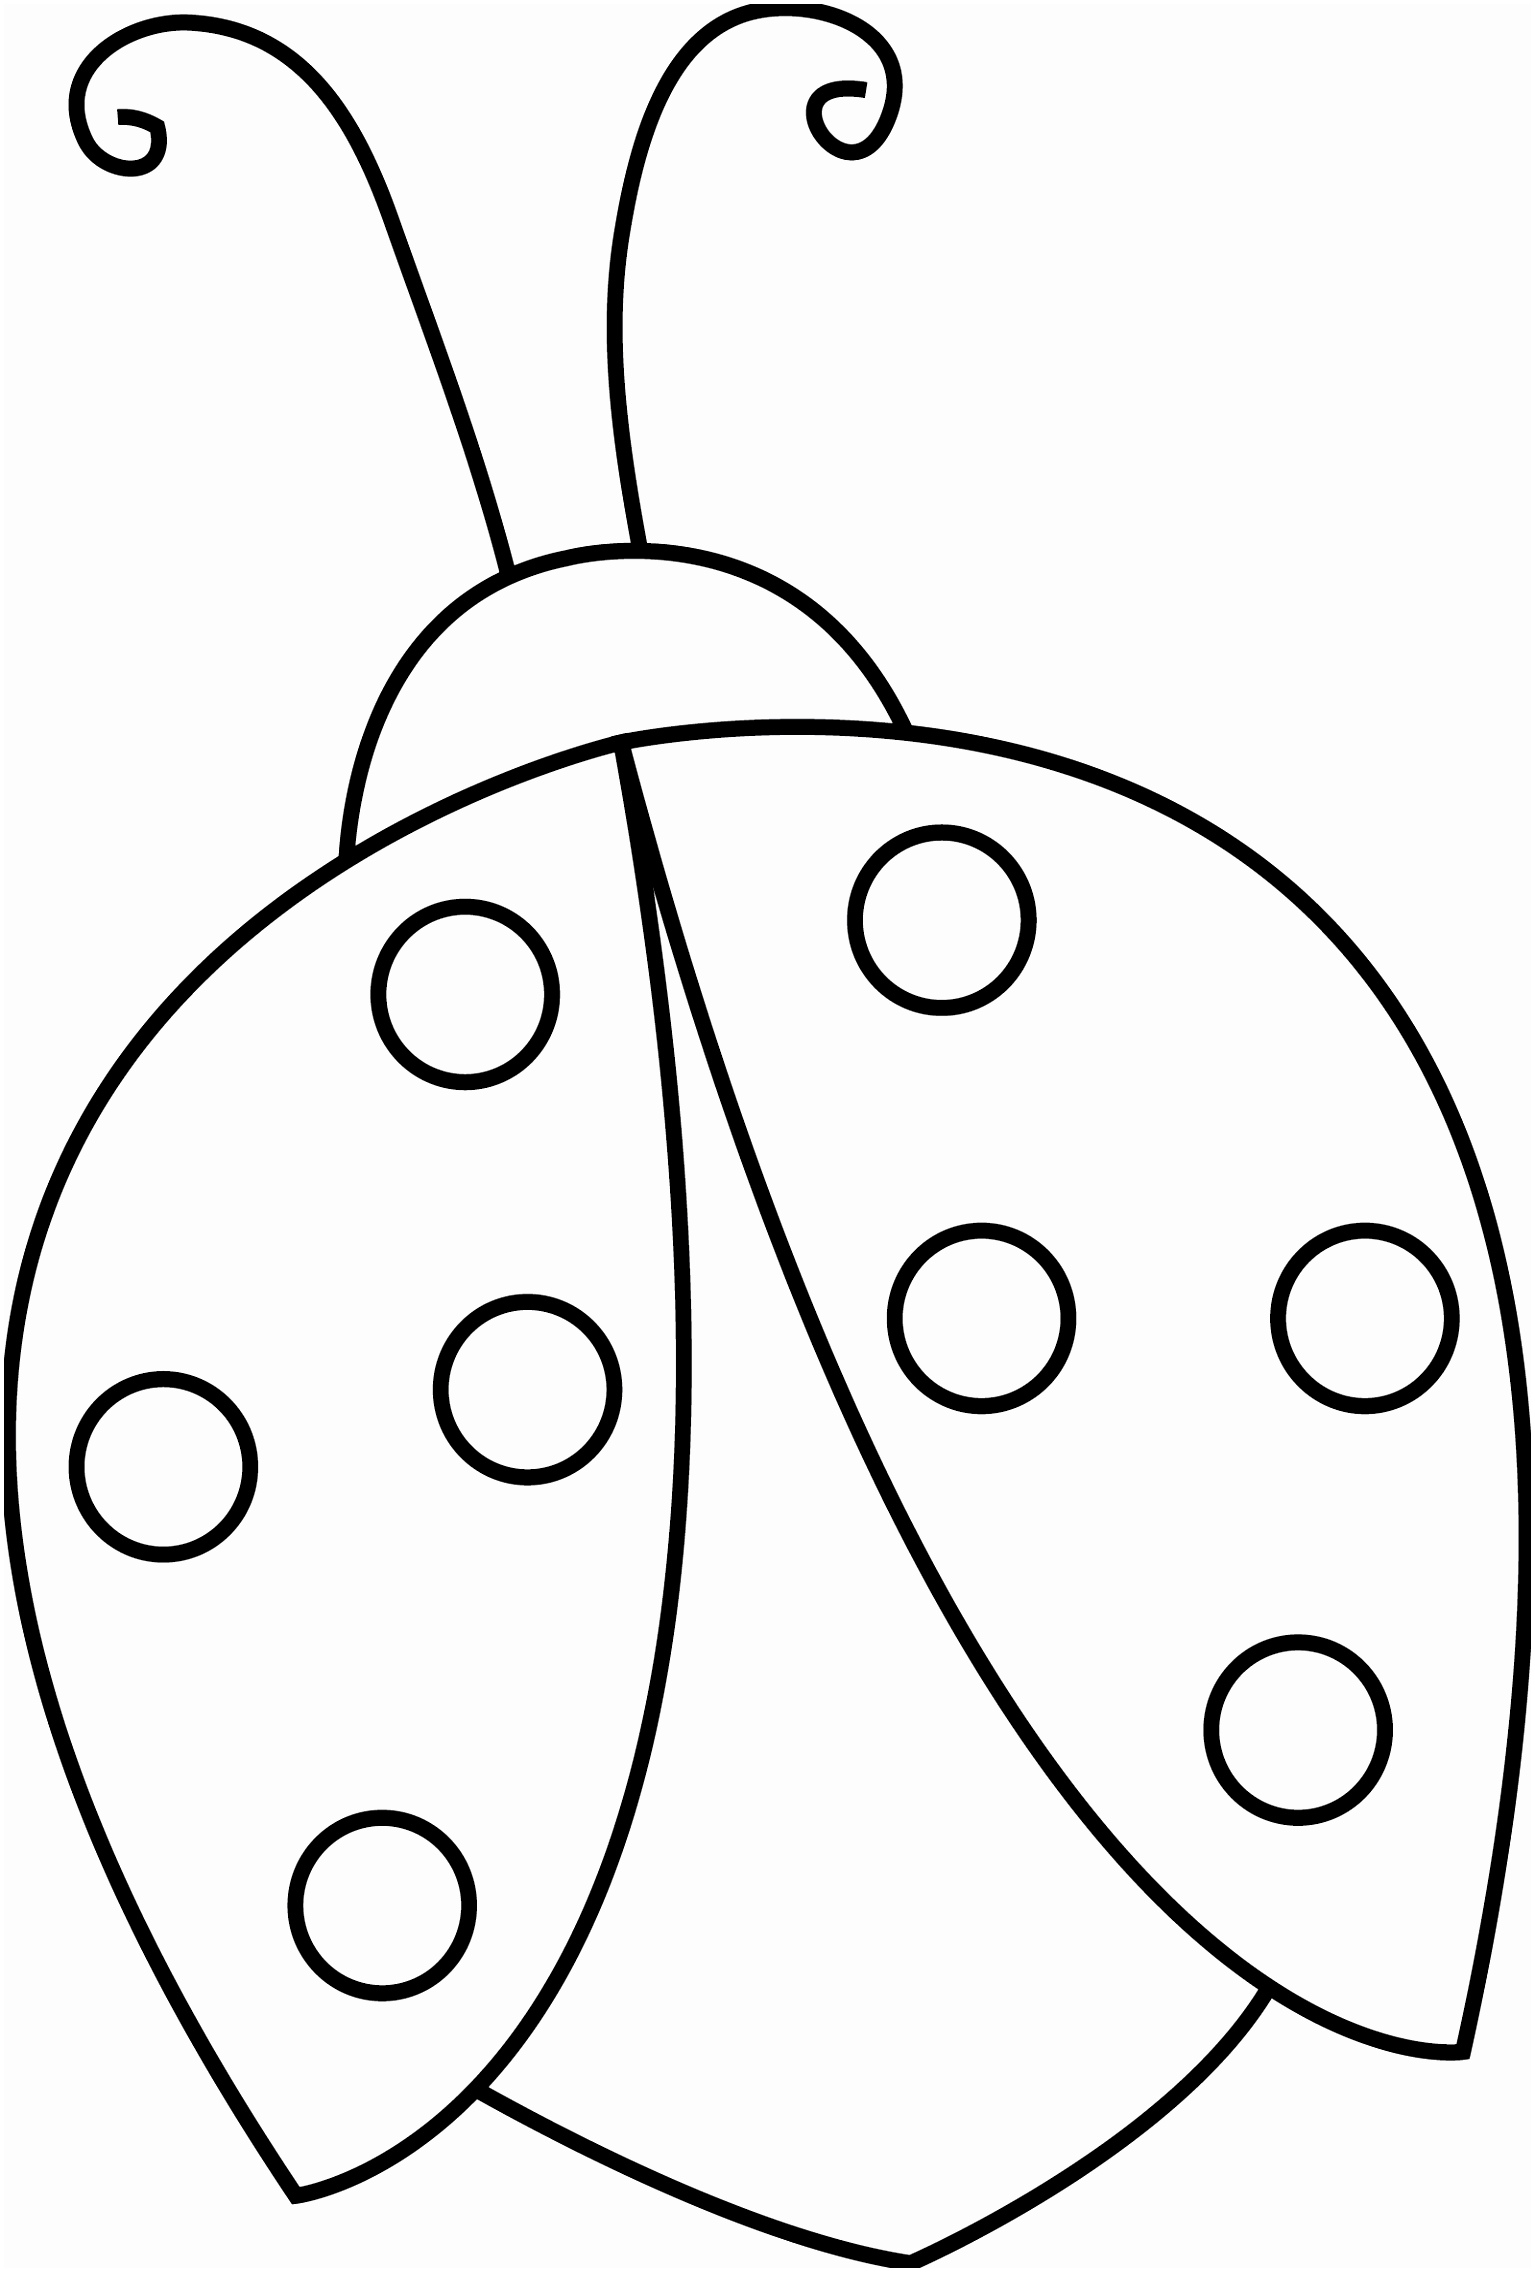 Ladybug Cut Out Template